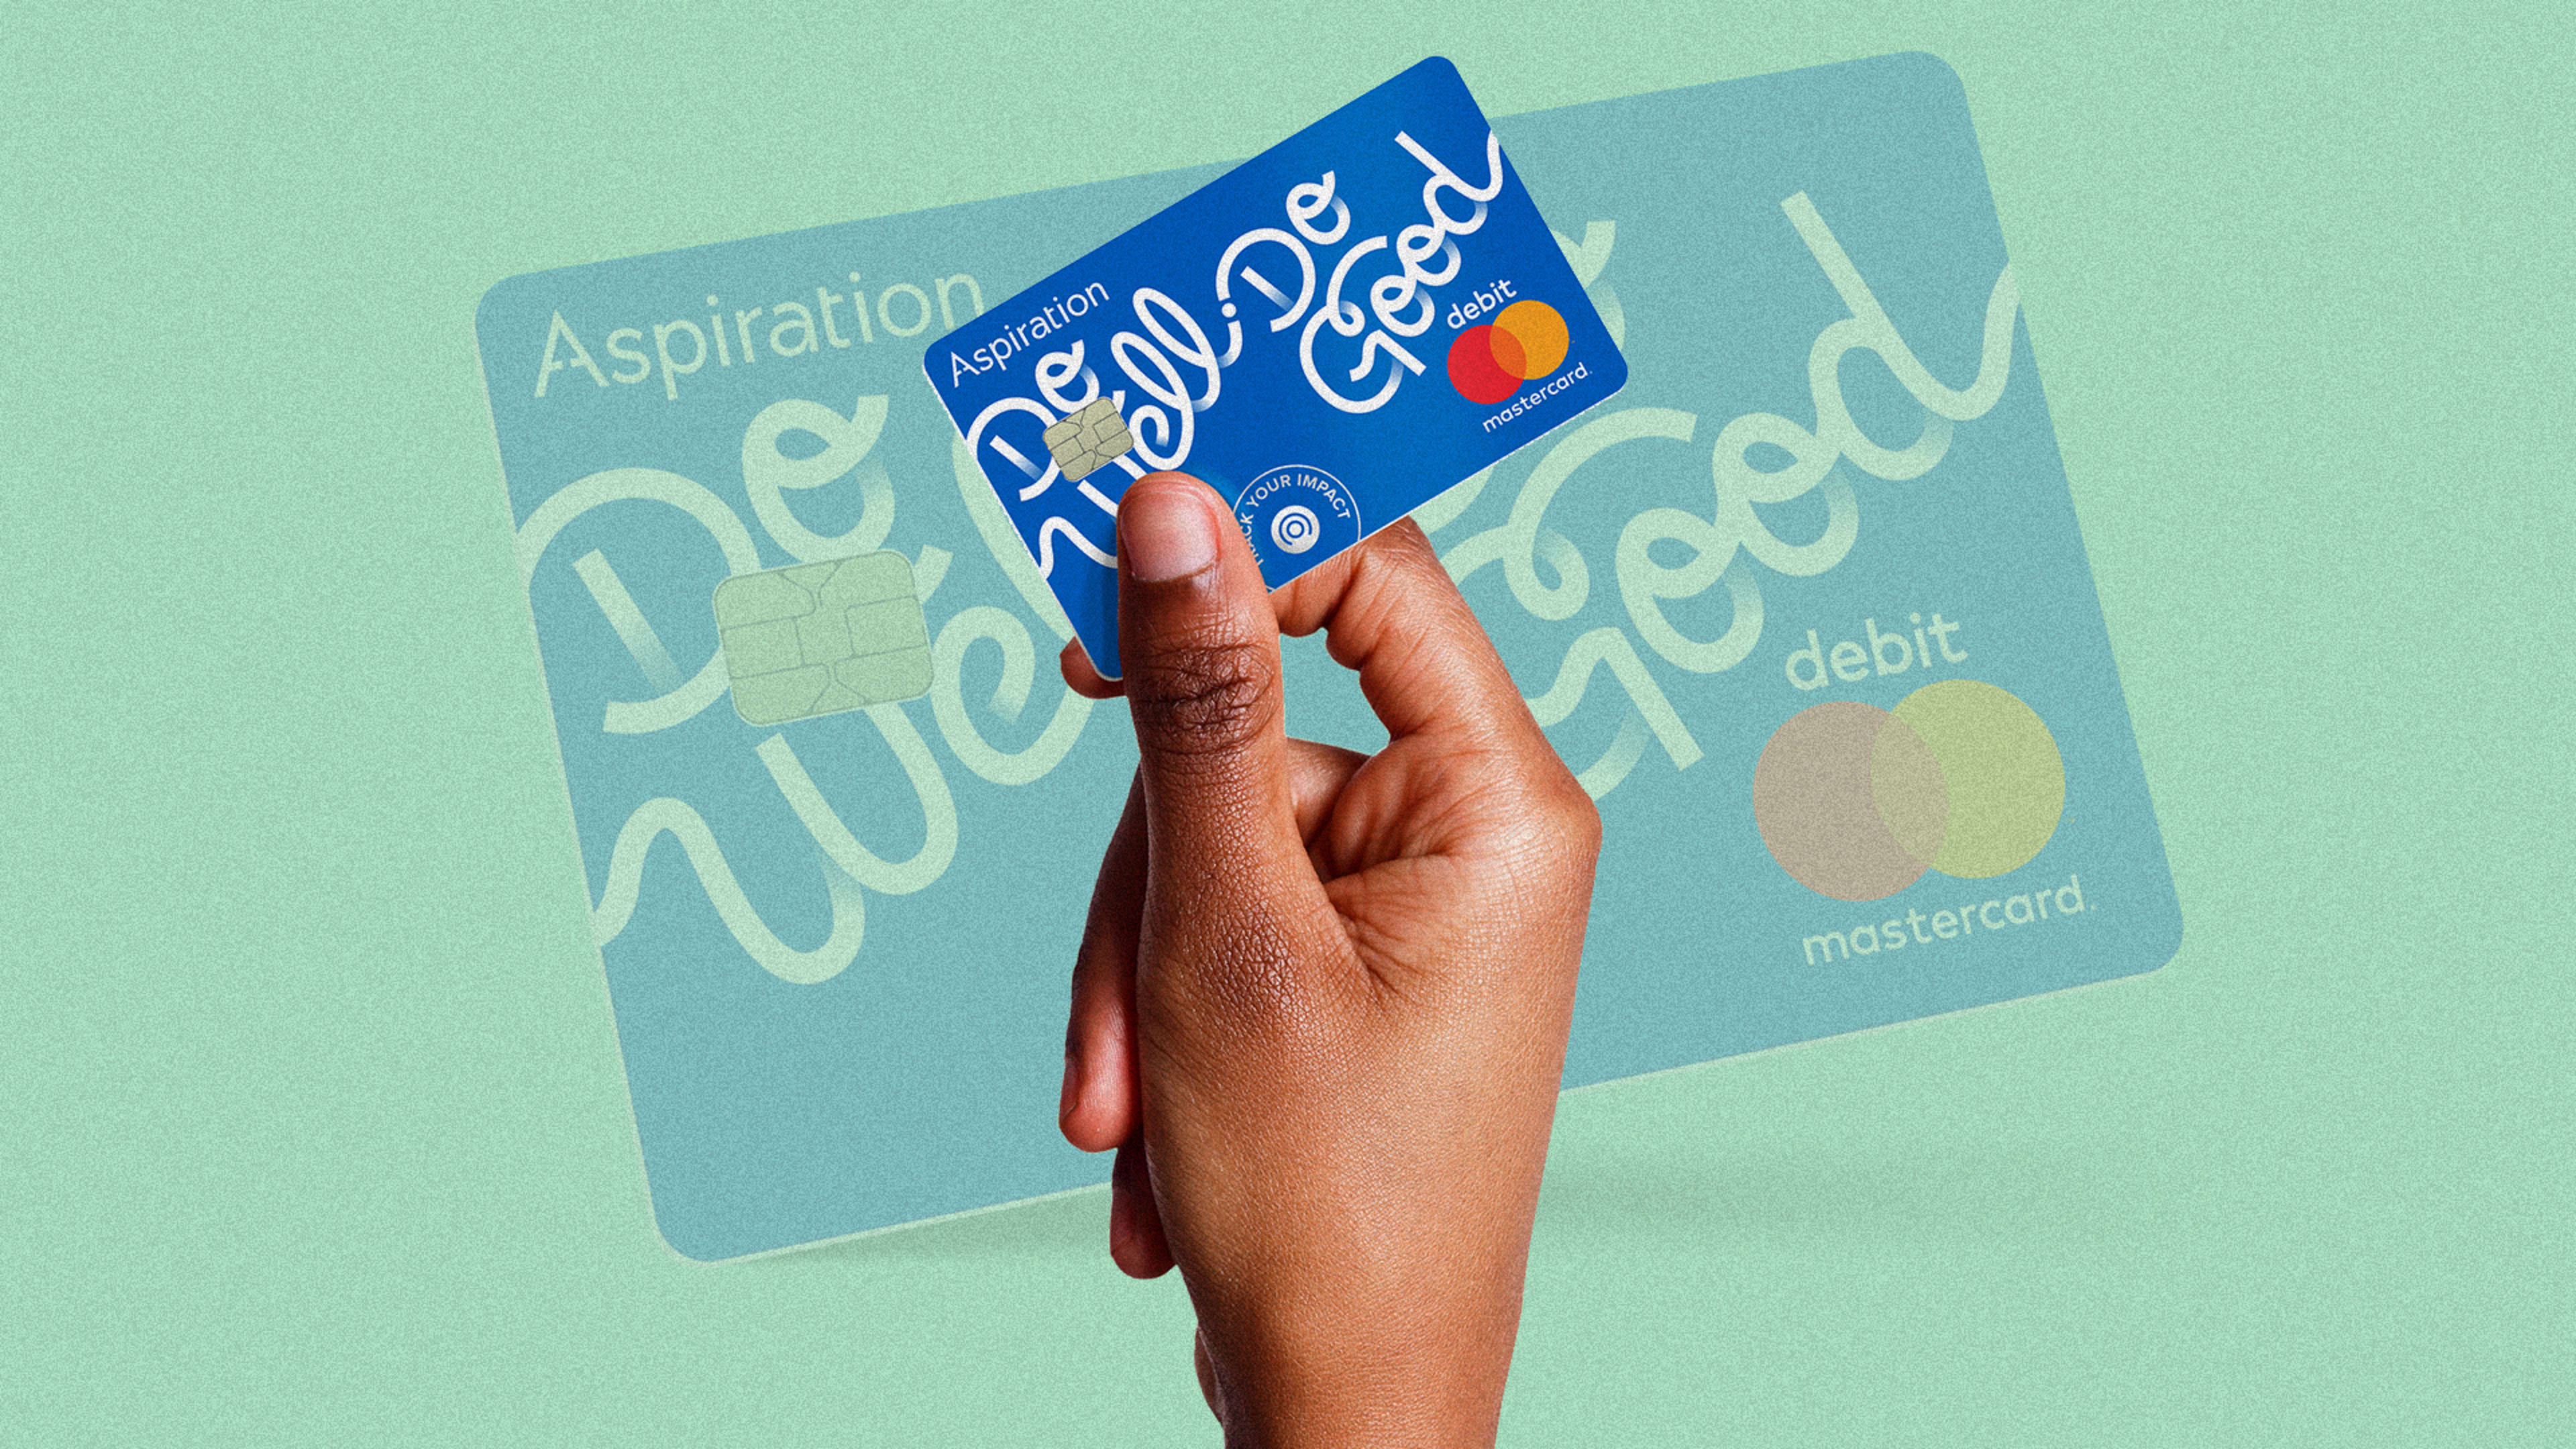 This new bank account pays you for shopping at responsible businesses